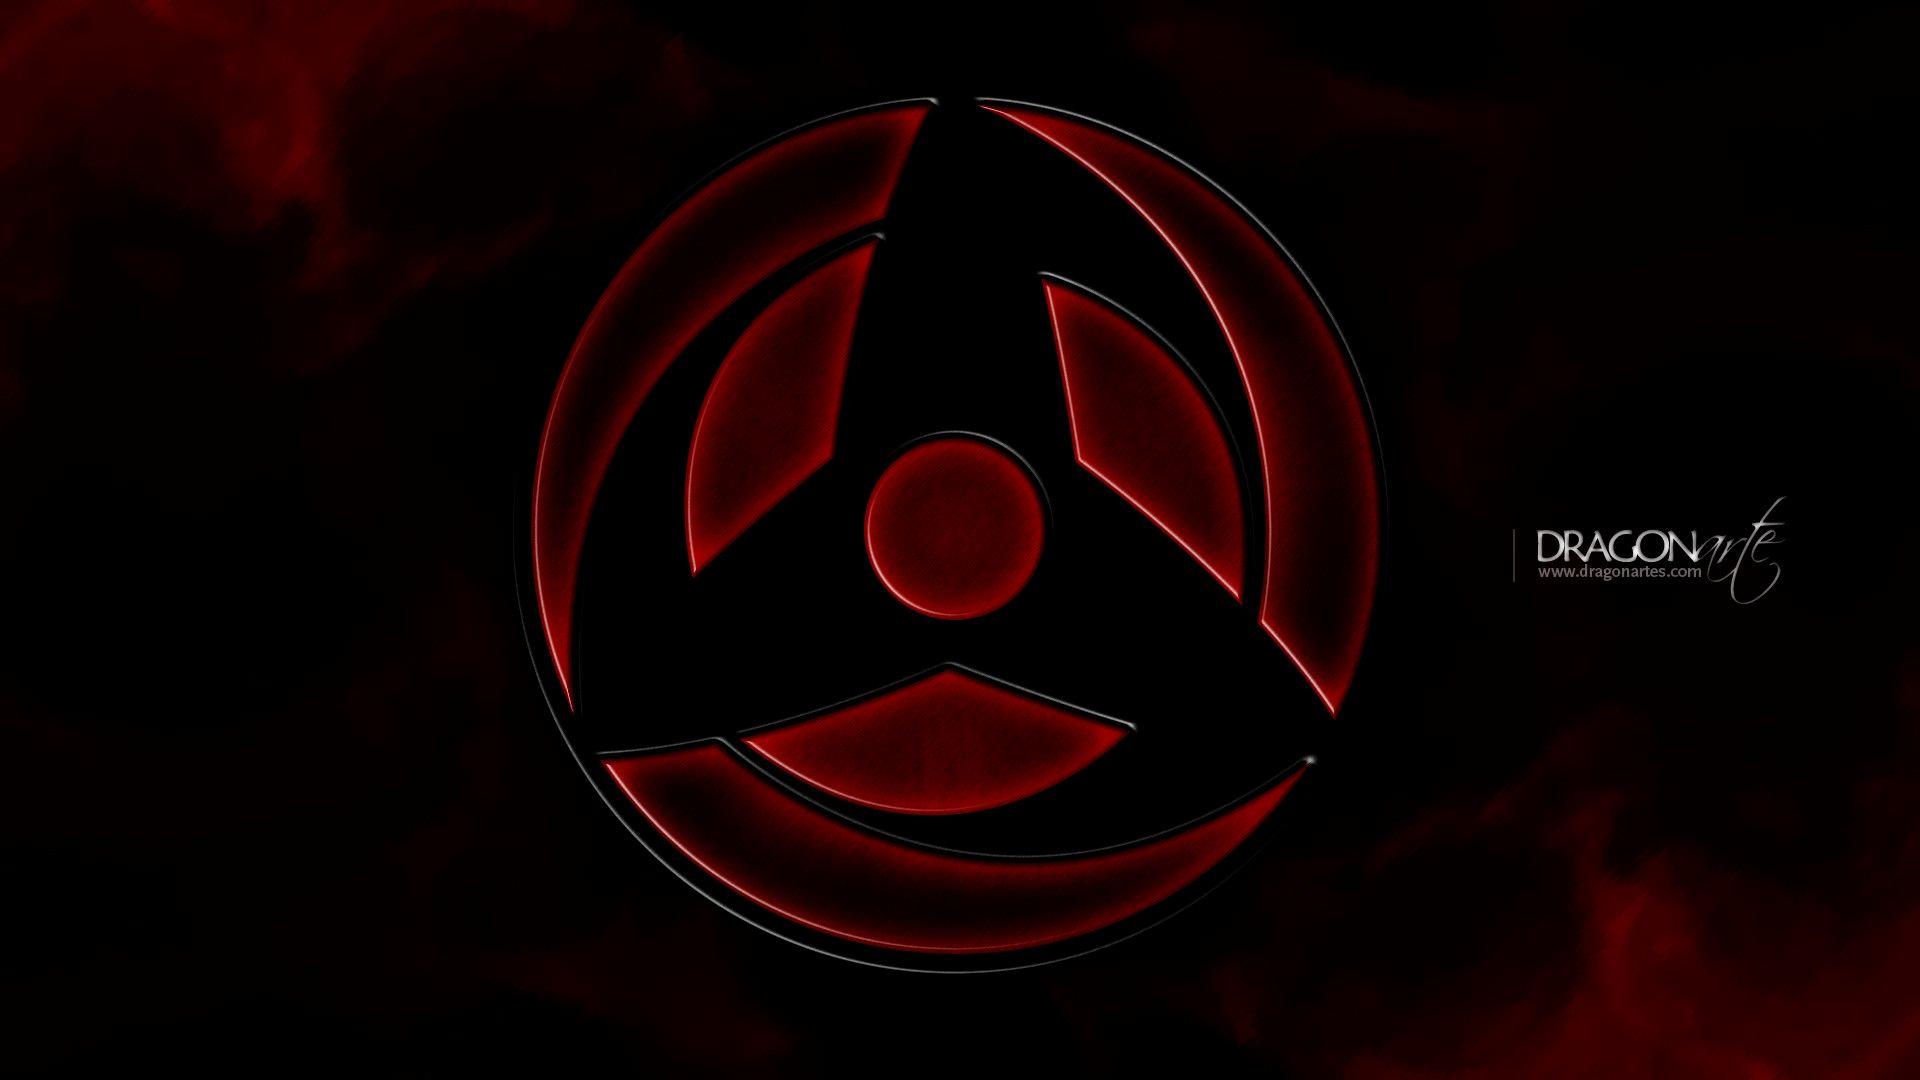 Sharingan Live Wallpaper Android Apps On Google Play - 1080p Sharingan Wallpaper Hd - HD Wallpaper 